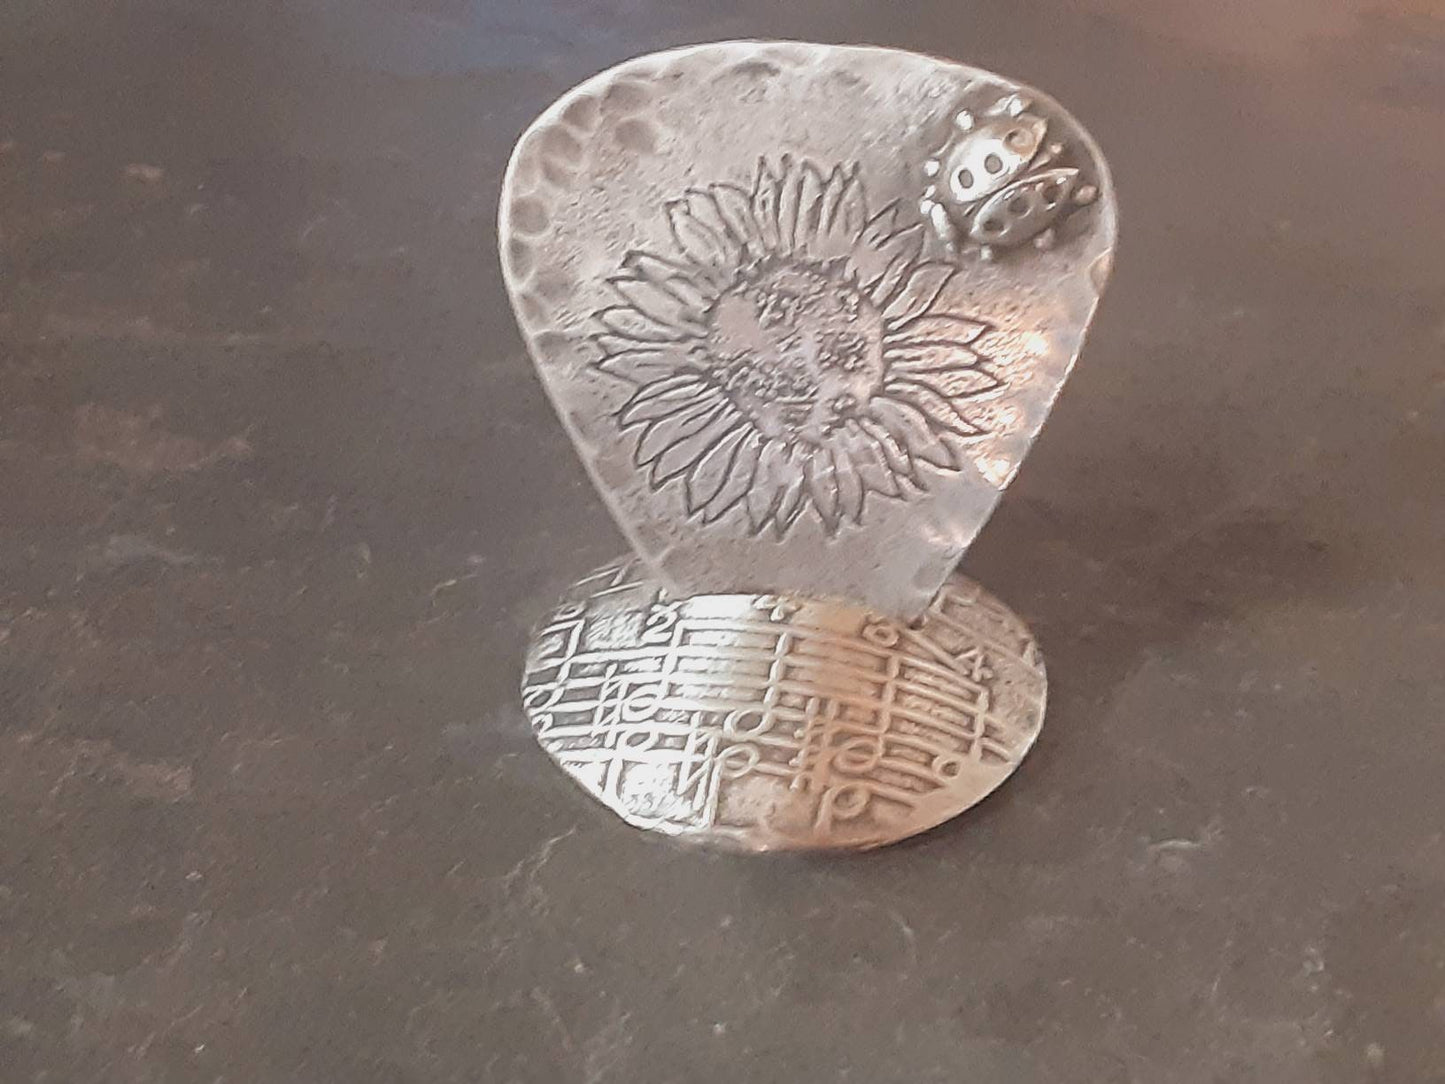 Guitar pick and stand combination in sterling silver with sunflower design and 3D soldered ladybug